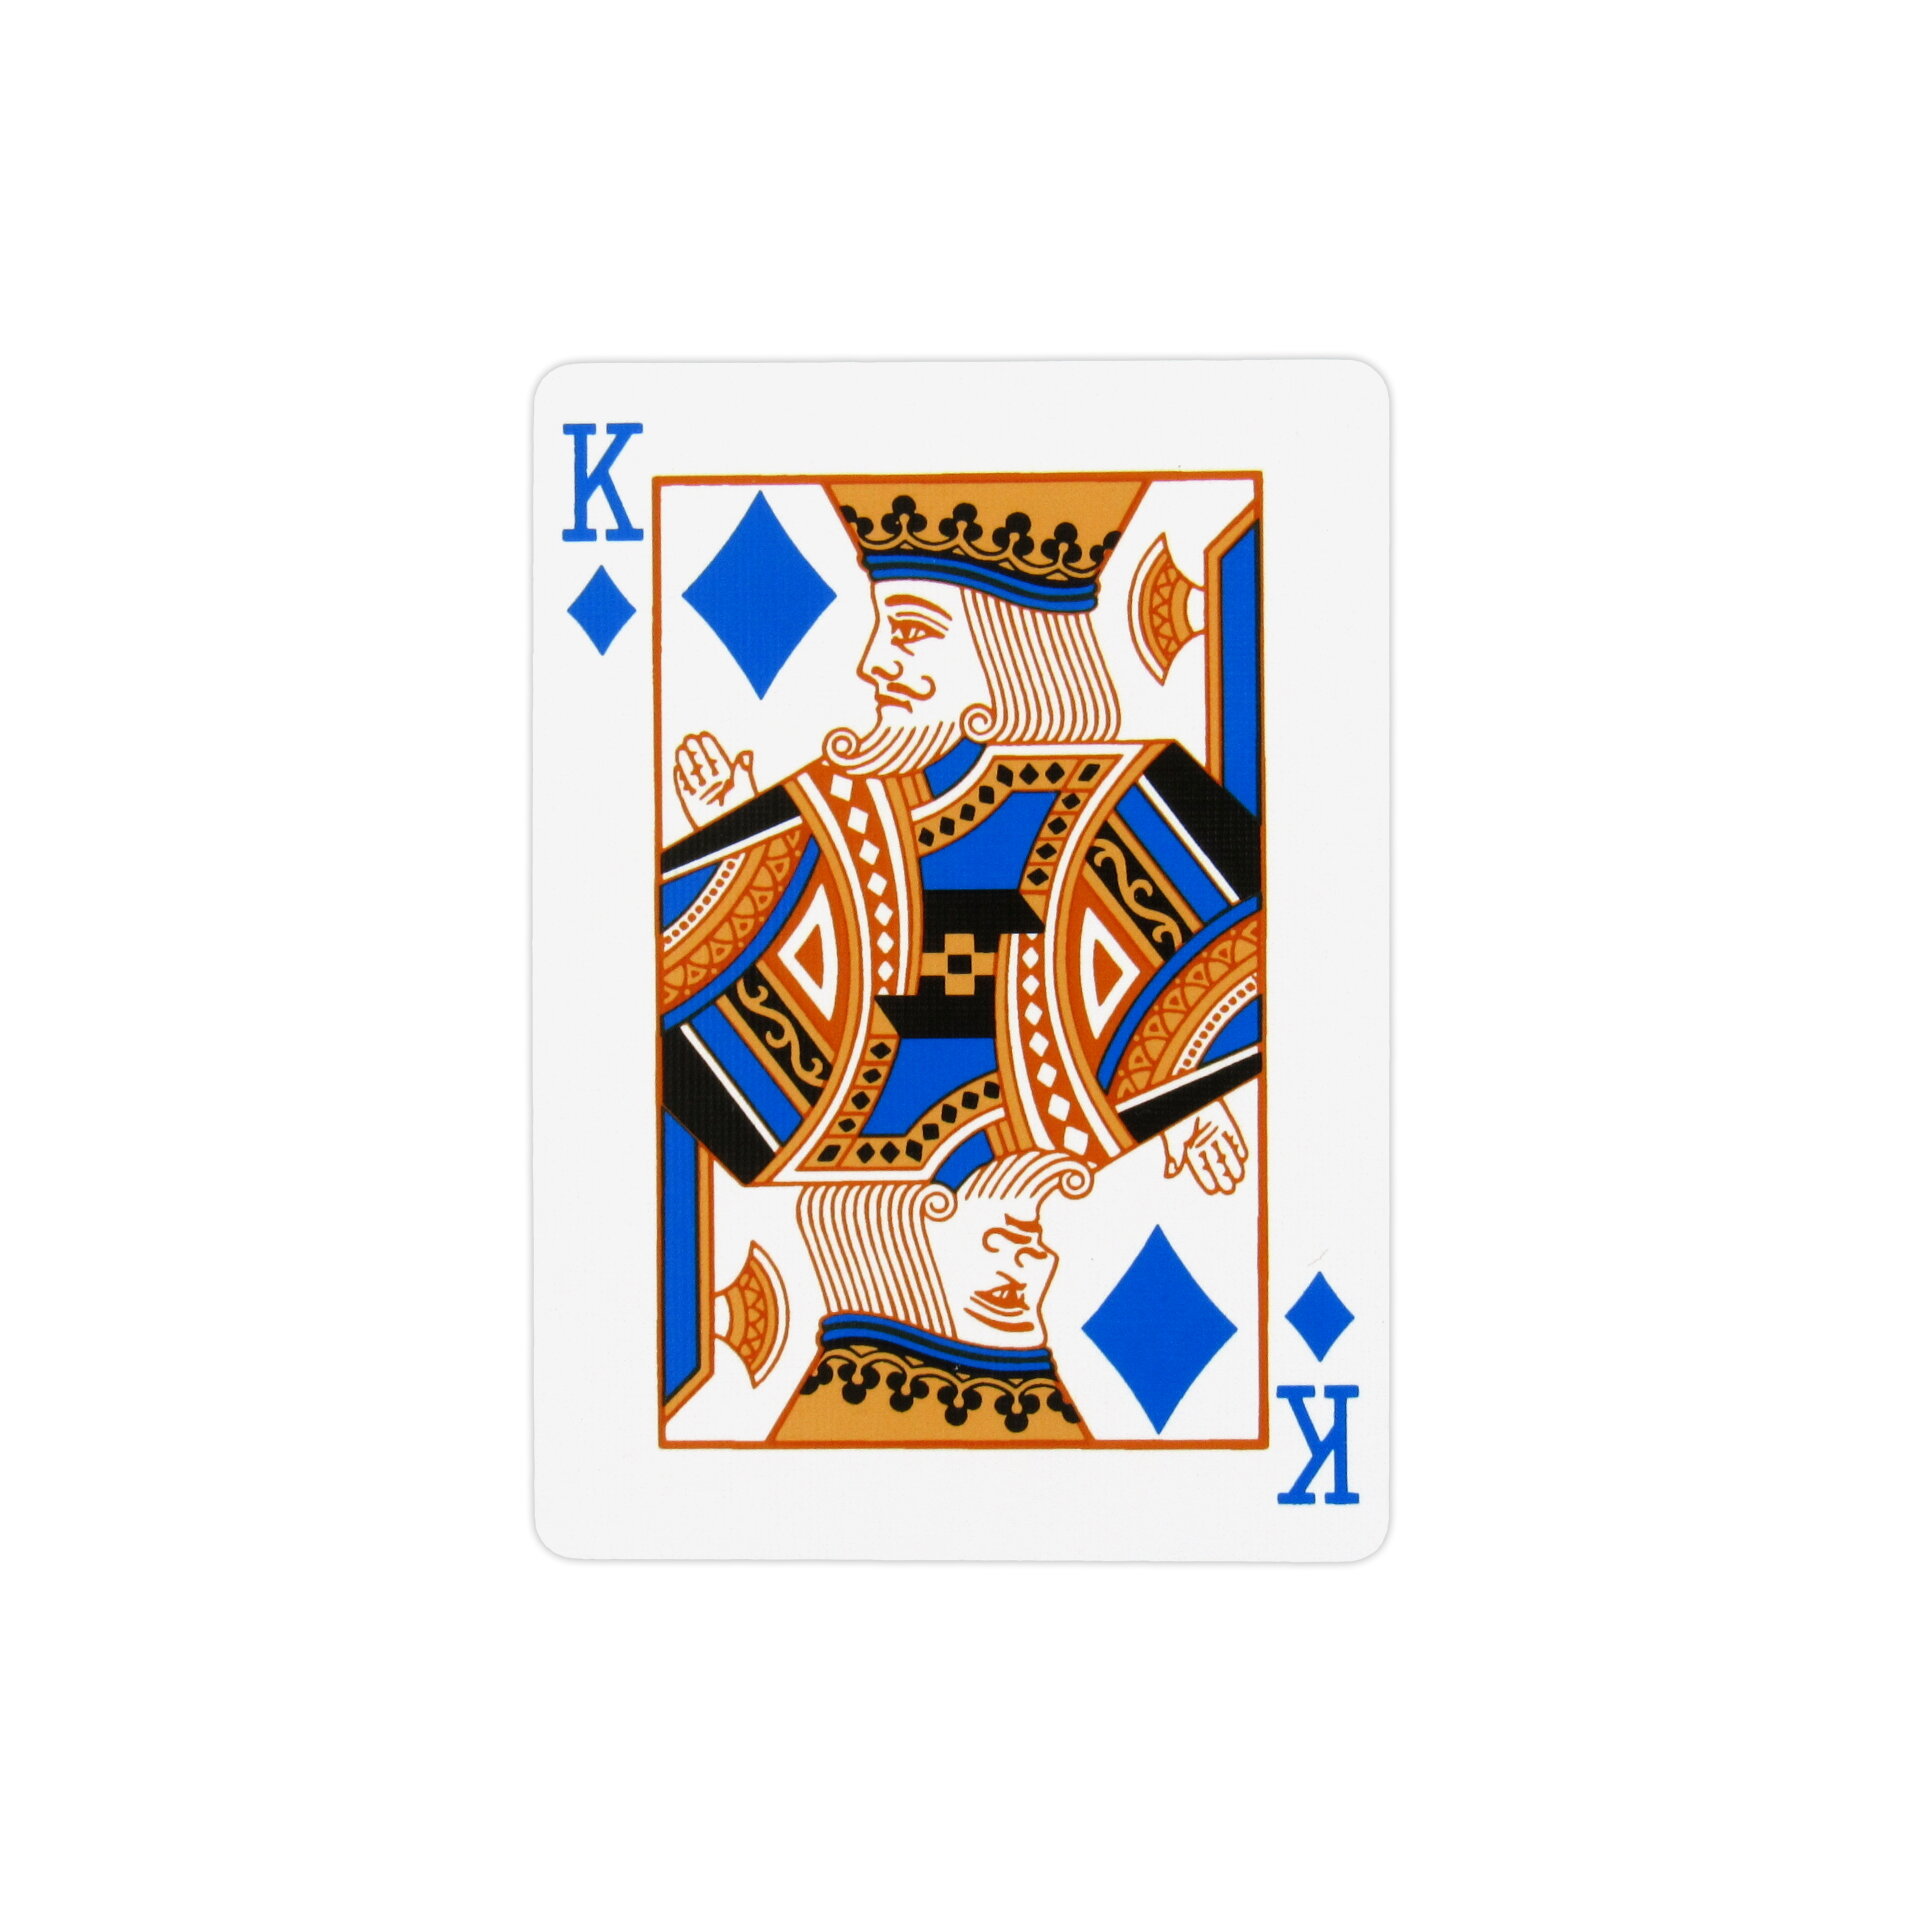 Bicycle Dragon Back Playing Cards Blue 